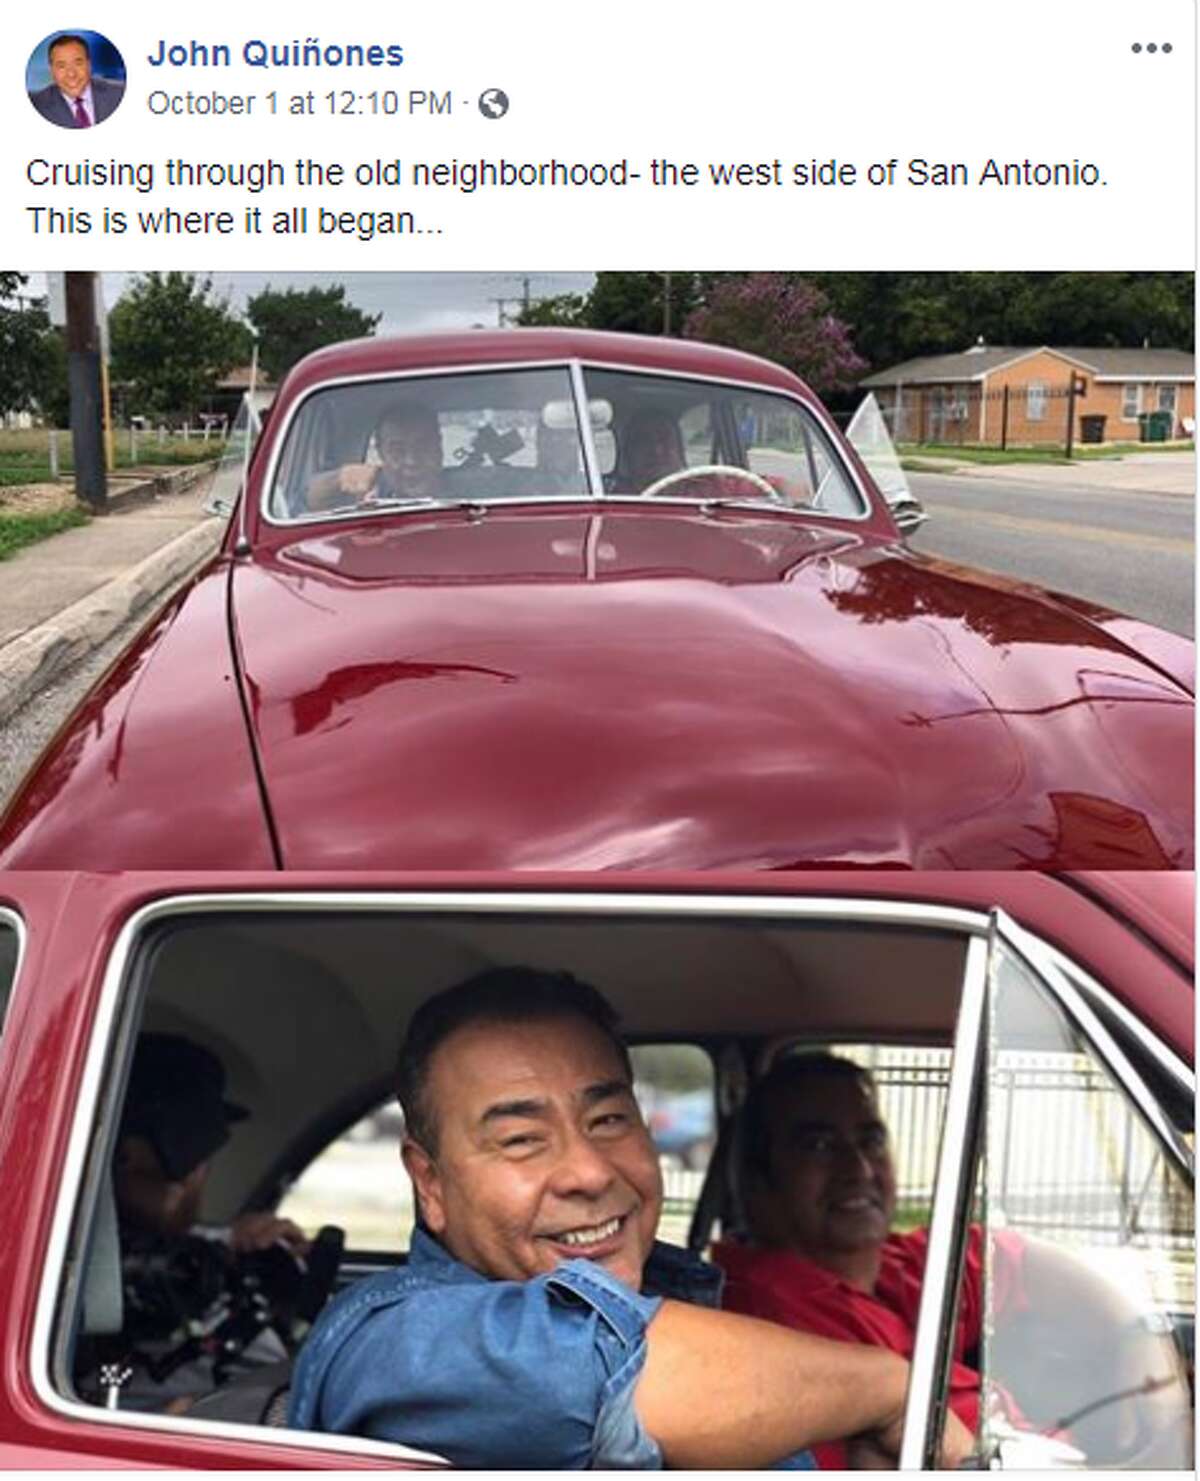 Facebook/John Quiñones: Cruising through the old neighborhood - the west side of San Antonio. This is where it all begin